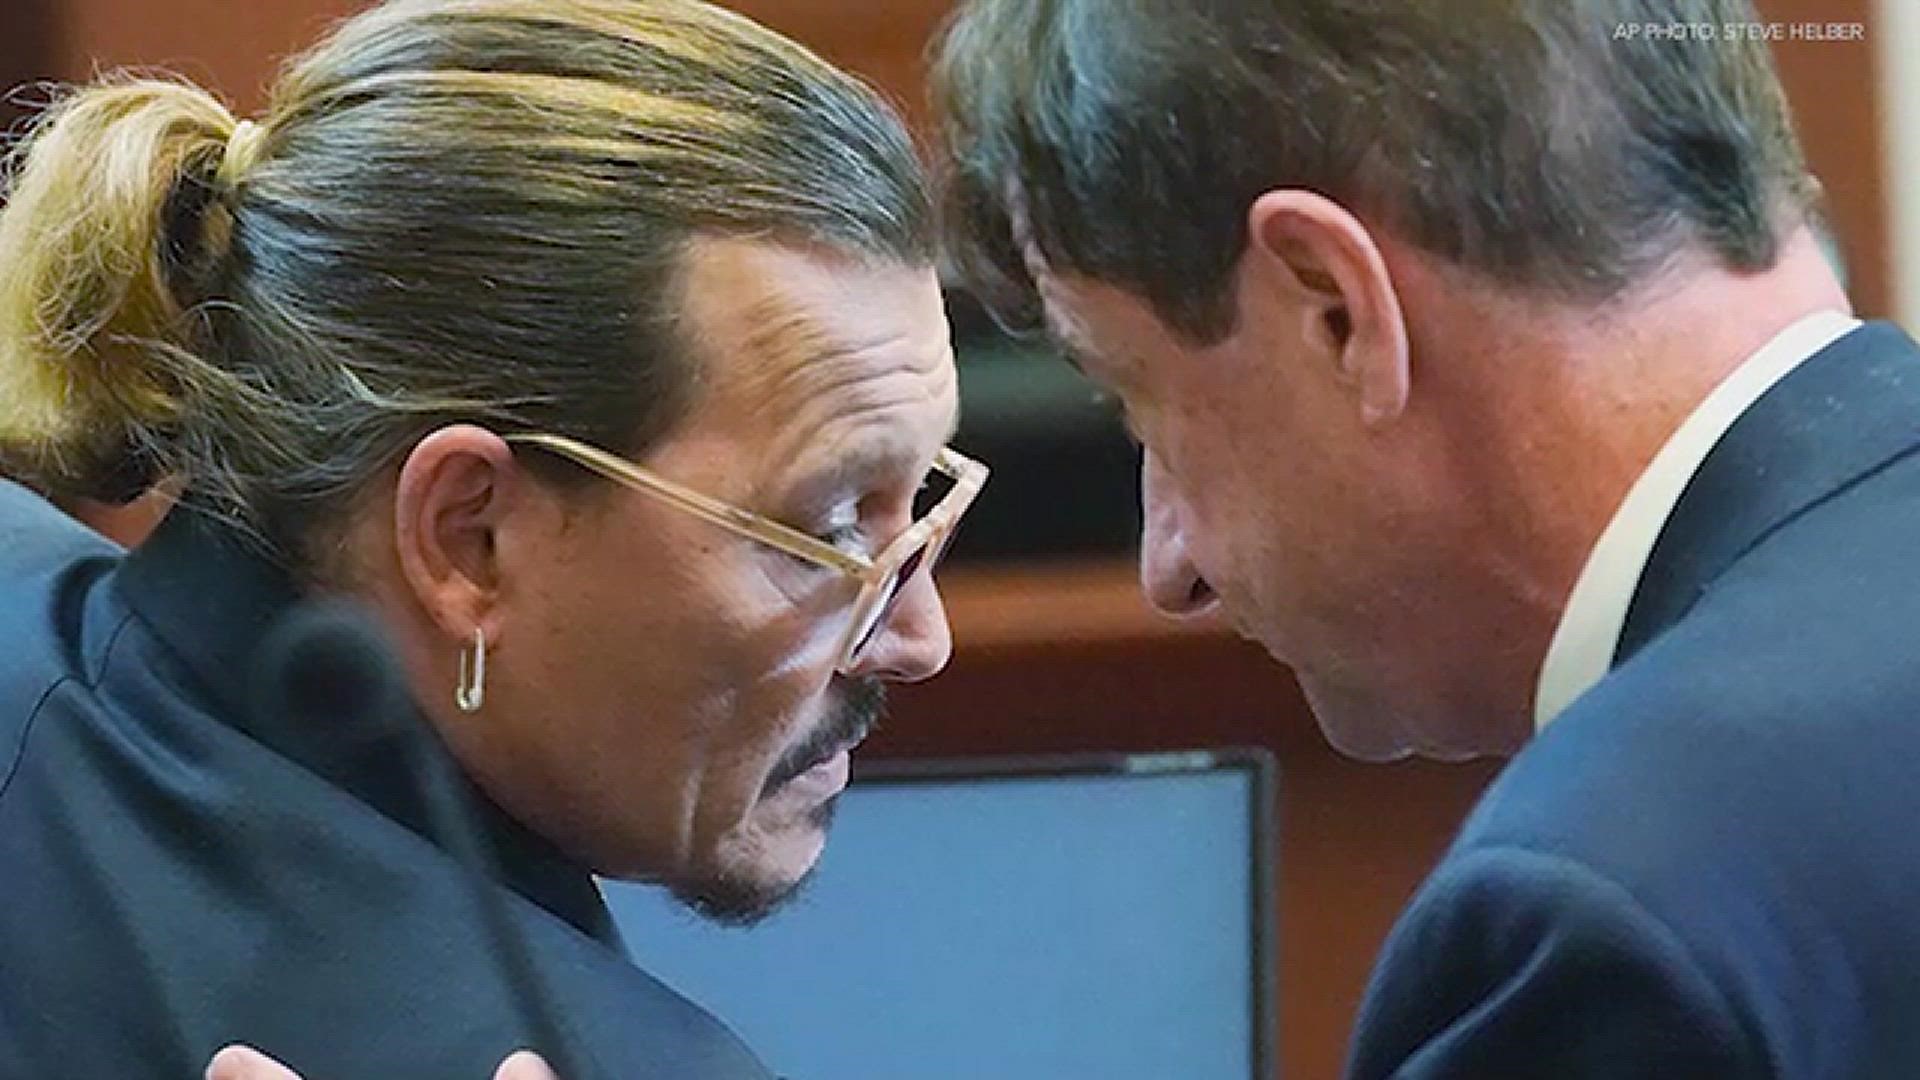 The Depp vs. Heard trial entered its sixth and final week on Monday. Here are some of the most important moments from the stand.